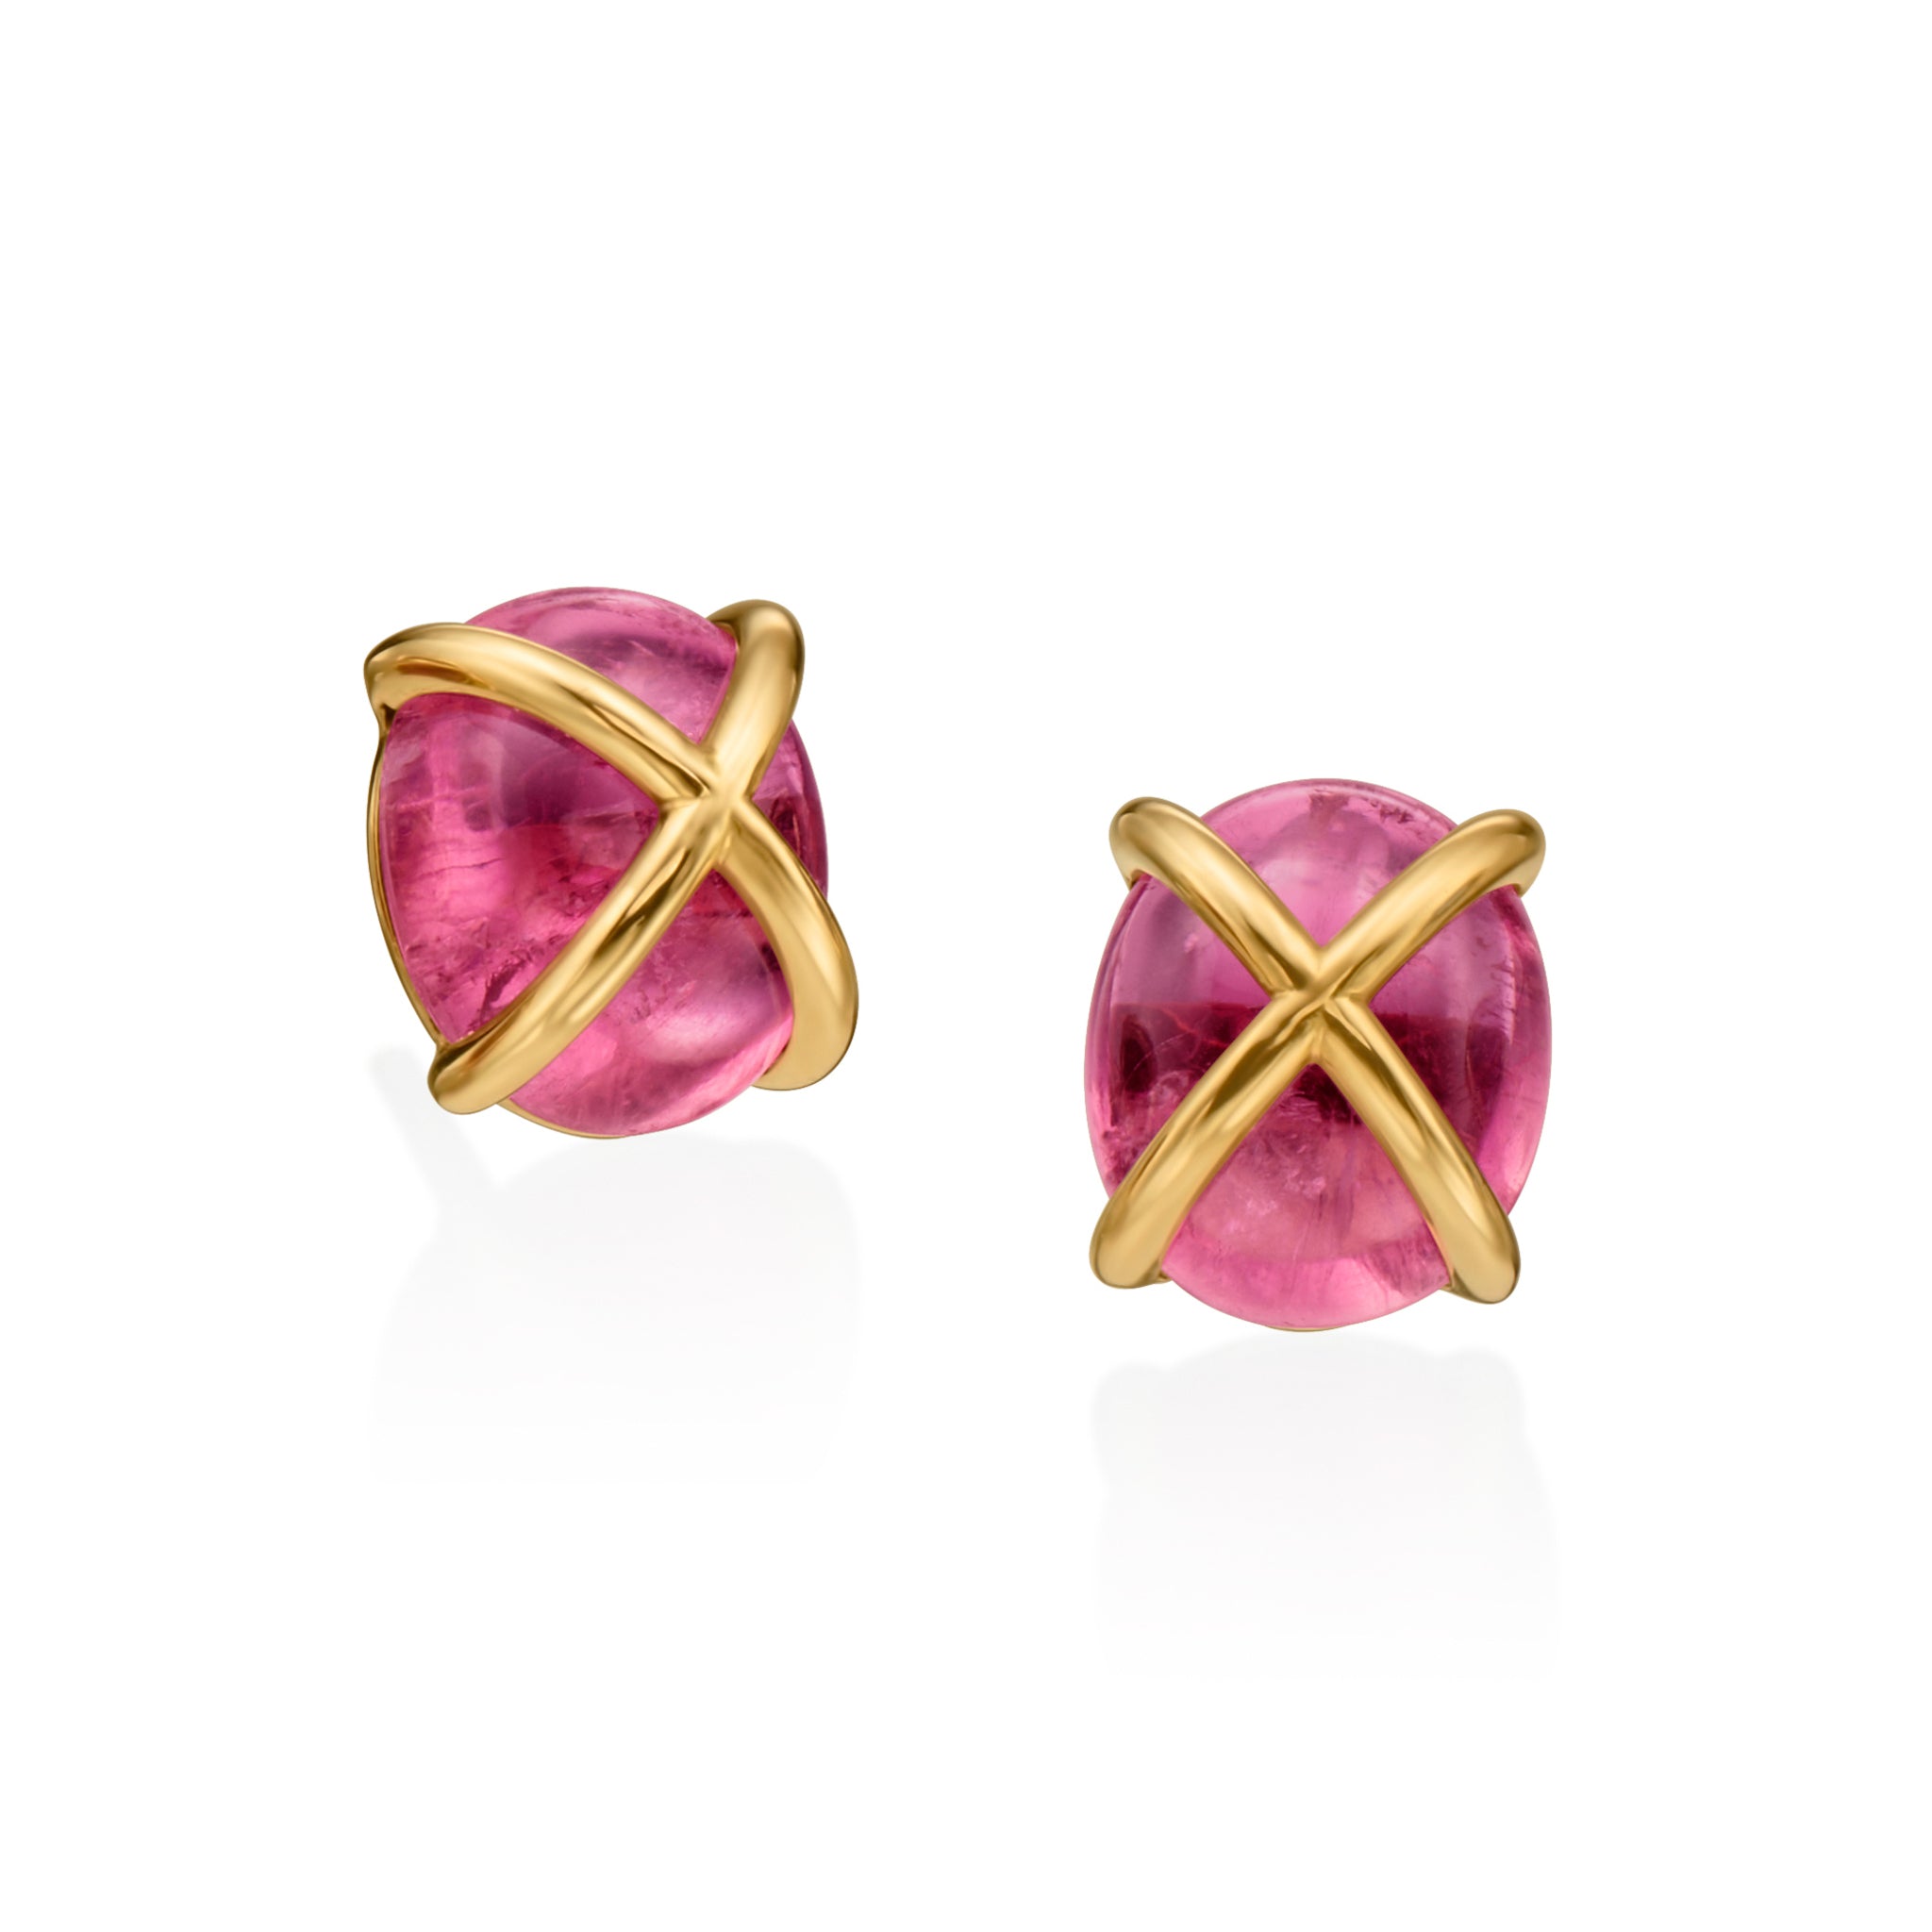 Cabochon Red Tourmaline and Gold Earrings